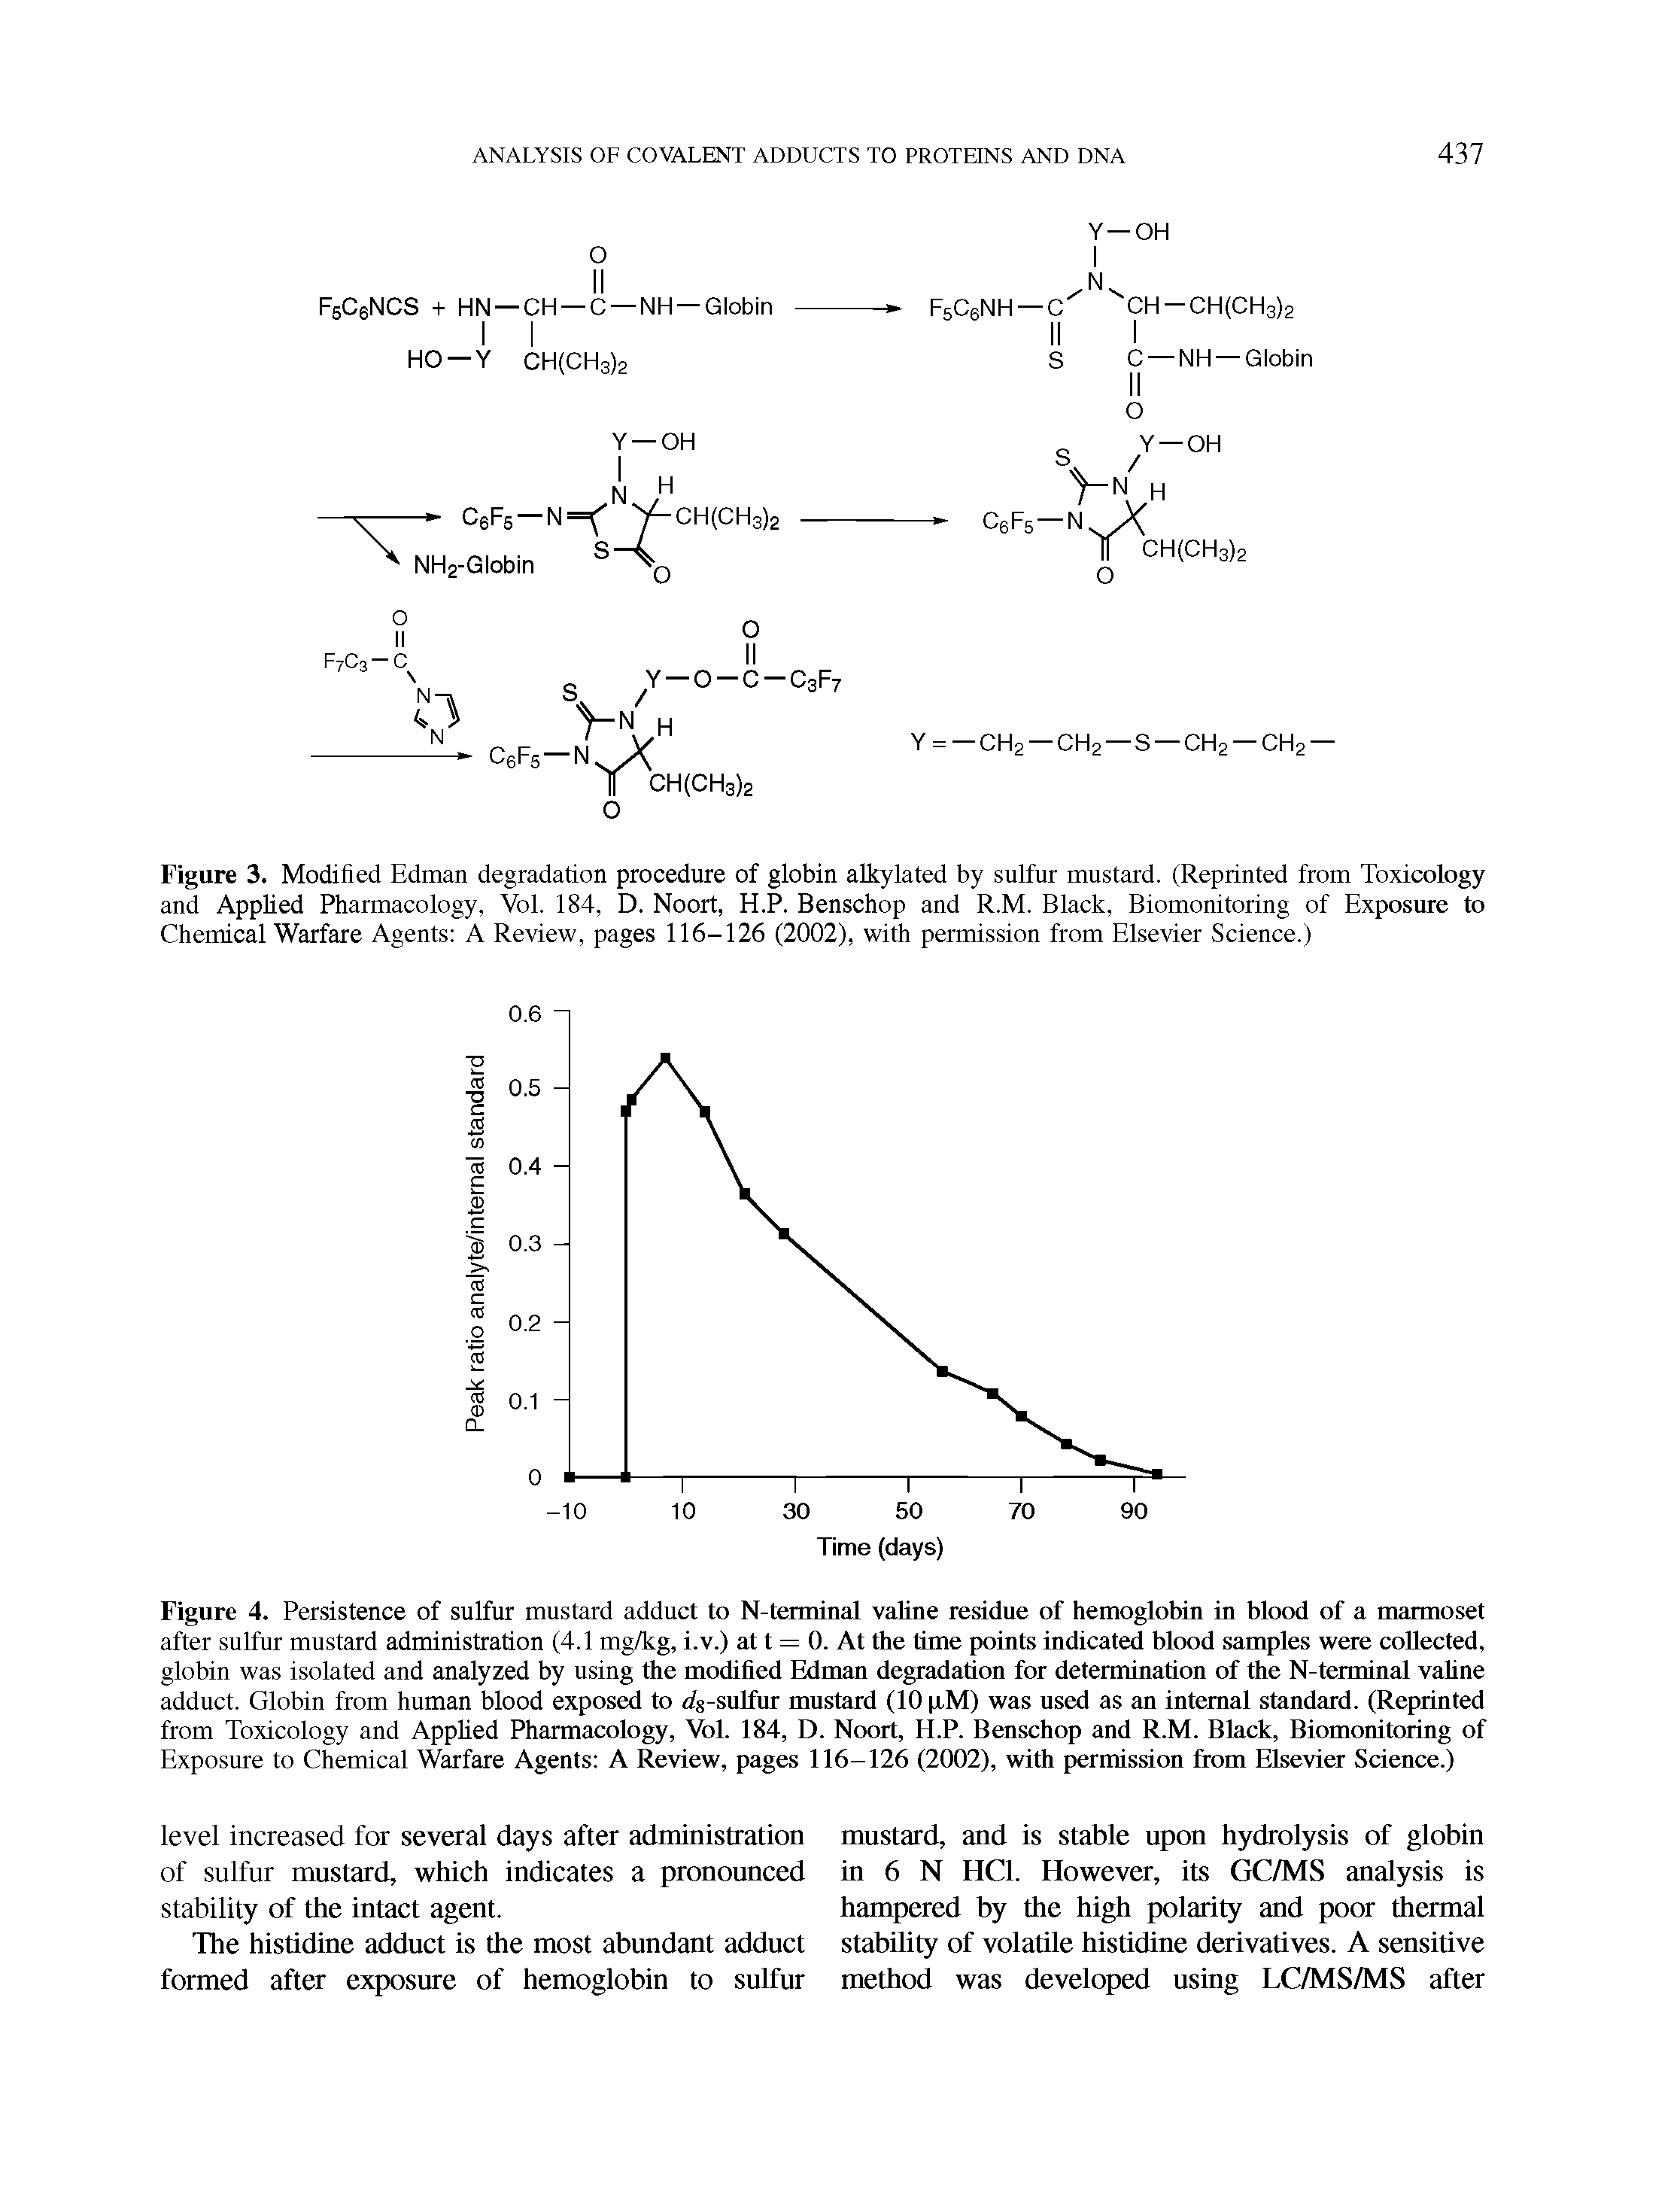 Figure 4. Persistence of sulfur mustard adduct to N-terminal valine residue of hemoglobin in blood of a marmoset after sulfur mustard administration (4.1 mg/kg, i.v.) at t = 0. At the time points indicated blood samples were collected, globin was isolated and analyzed by using the modified Edman degradation for determination of the N-terminal valine adduct. Globin from human blood exposed to ris-sulfur mustard (10 iM) was used as an internal standard. (Reprinted from Toxicology and Applied Pharmacology, Vol. 184, D. Noort, H.P. Benschop and R.M. Black, Biomonitoring of Exposure to Chemical Warfare Agents A Review, pages 116-126 (2002), with permission from Elsevier Science.)...